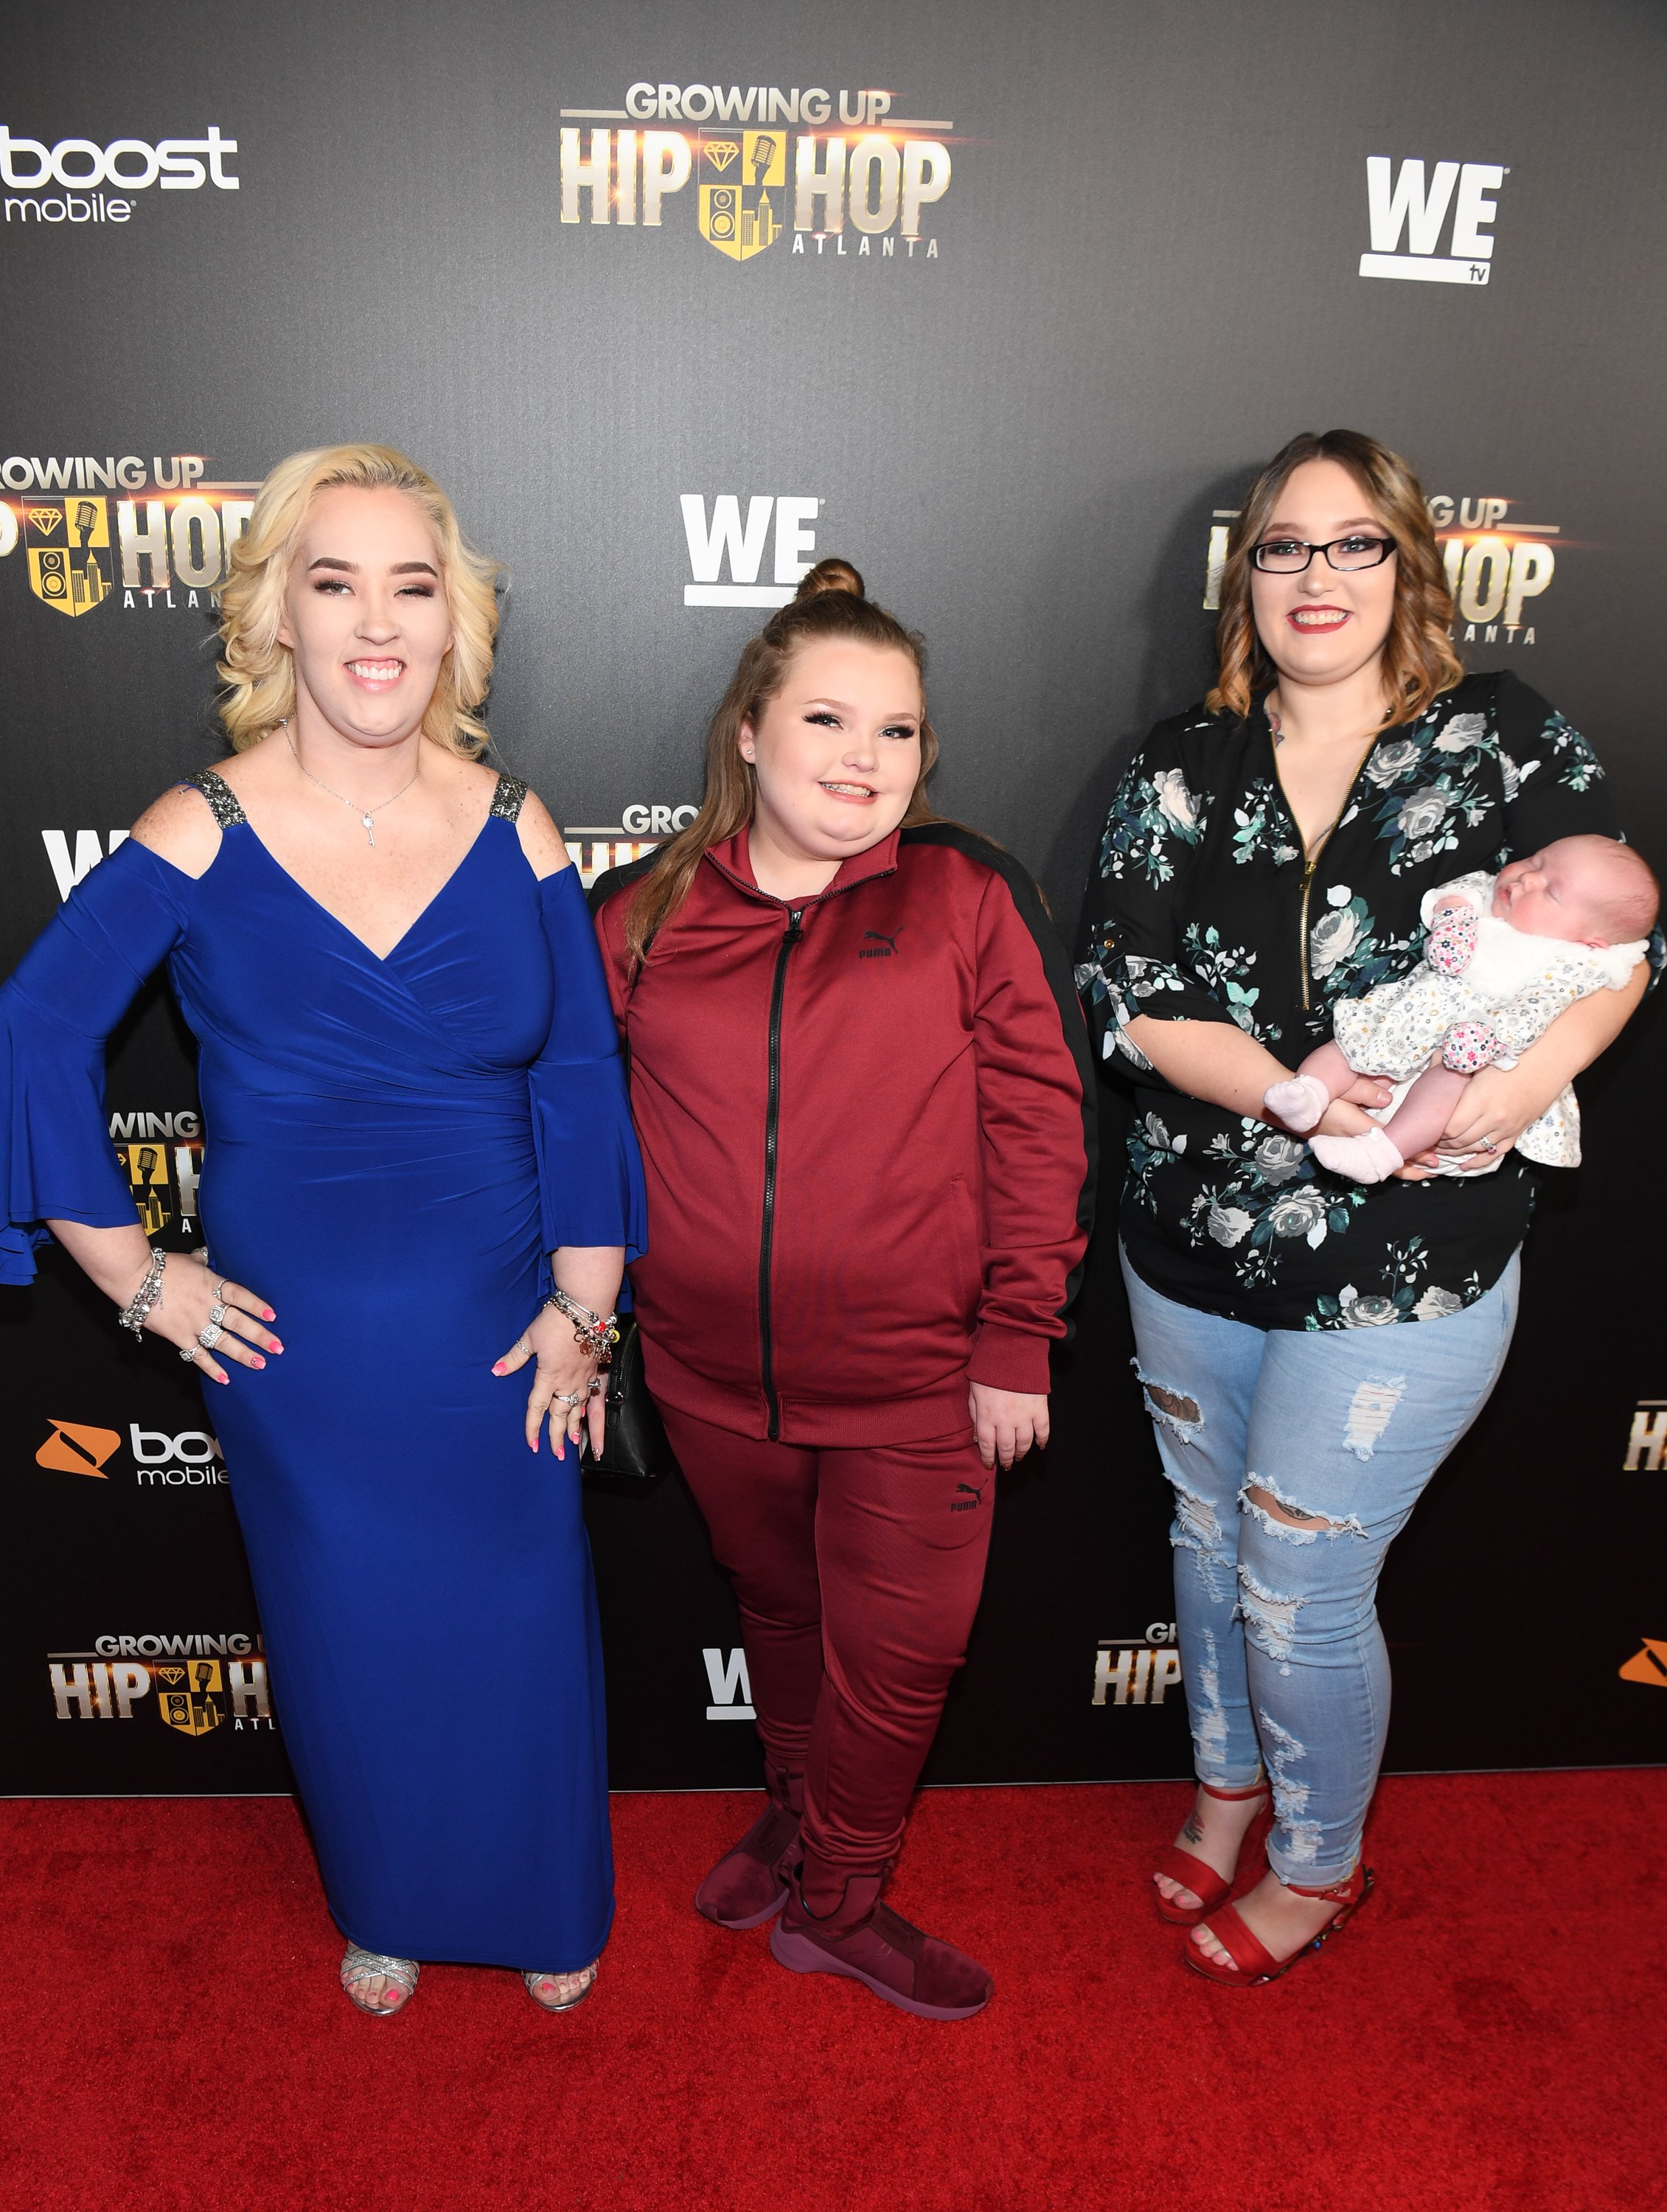 June Shannon and daughters Alana Thompson and Lauryn Thompson with little Ella Grace Efird attend the premiere of "Growing Up Hip Hop Atlanta" season 2 in Atlanta, Georgia on January 9, 2018 | Photo: Getty Images